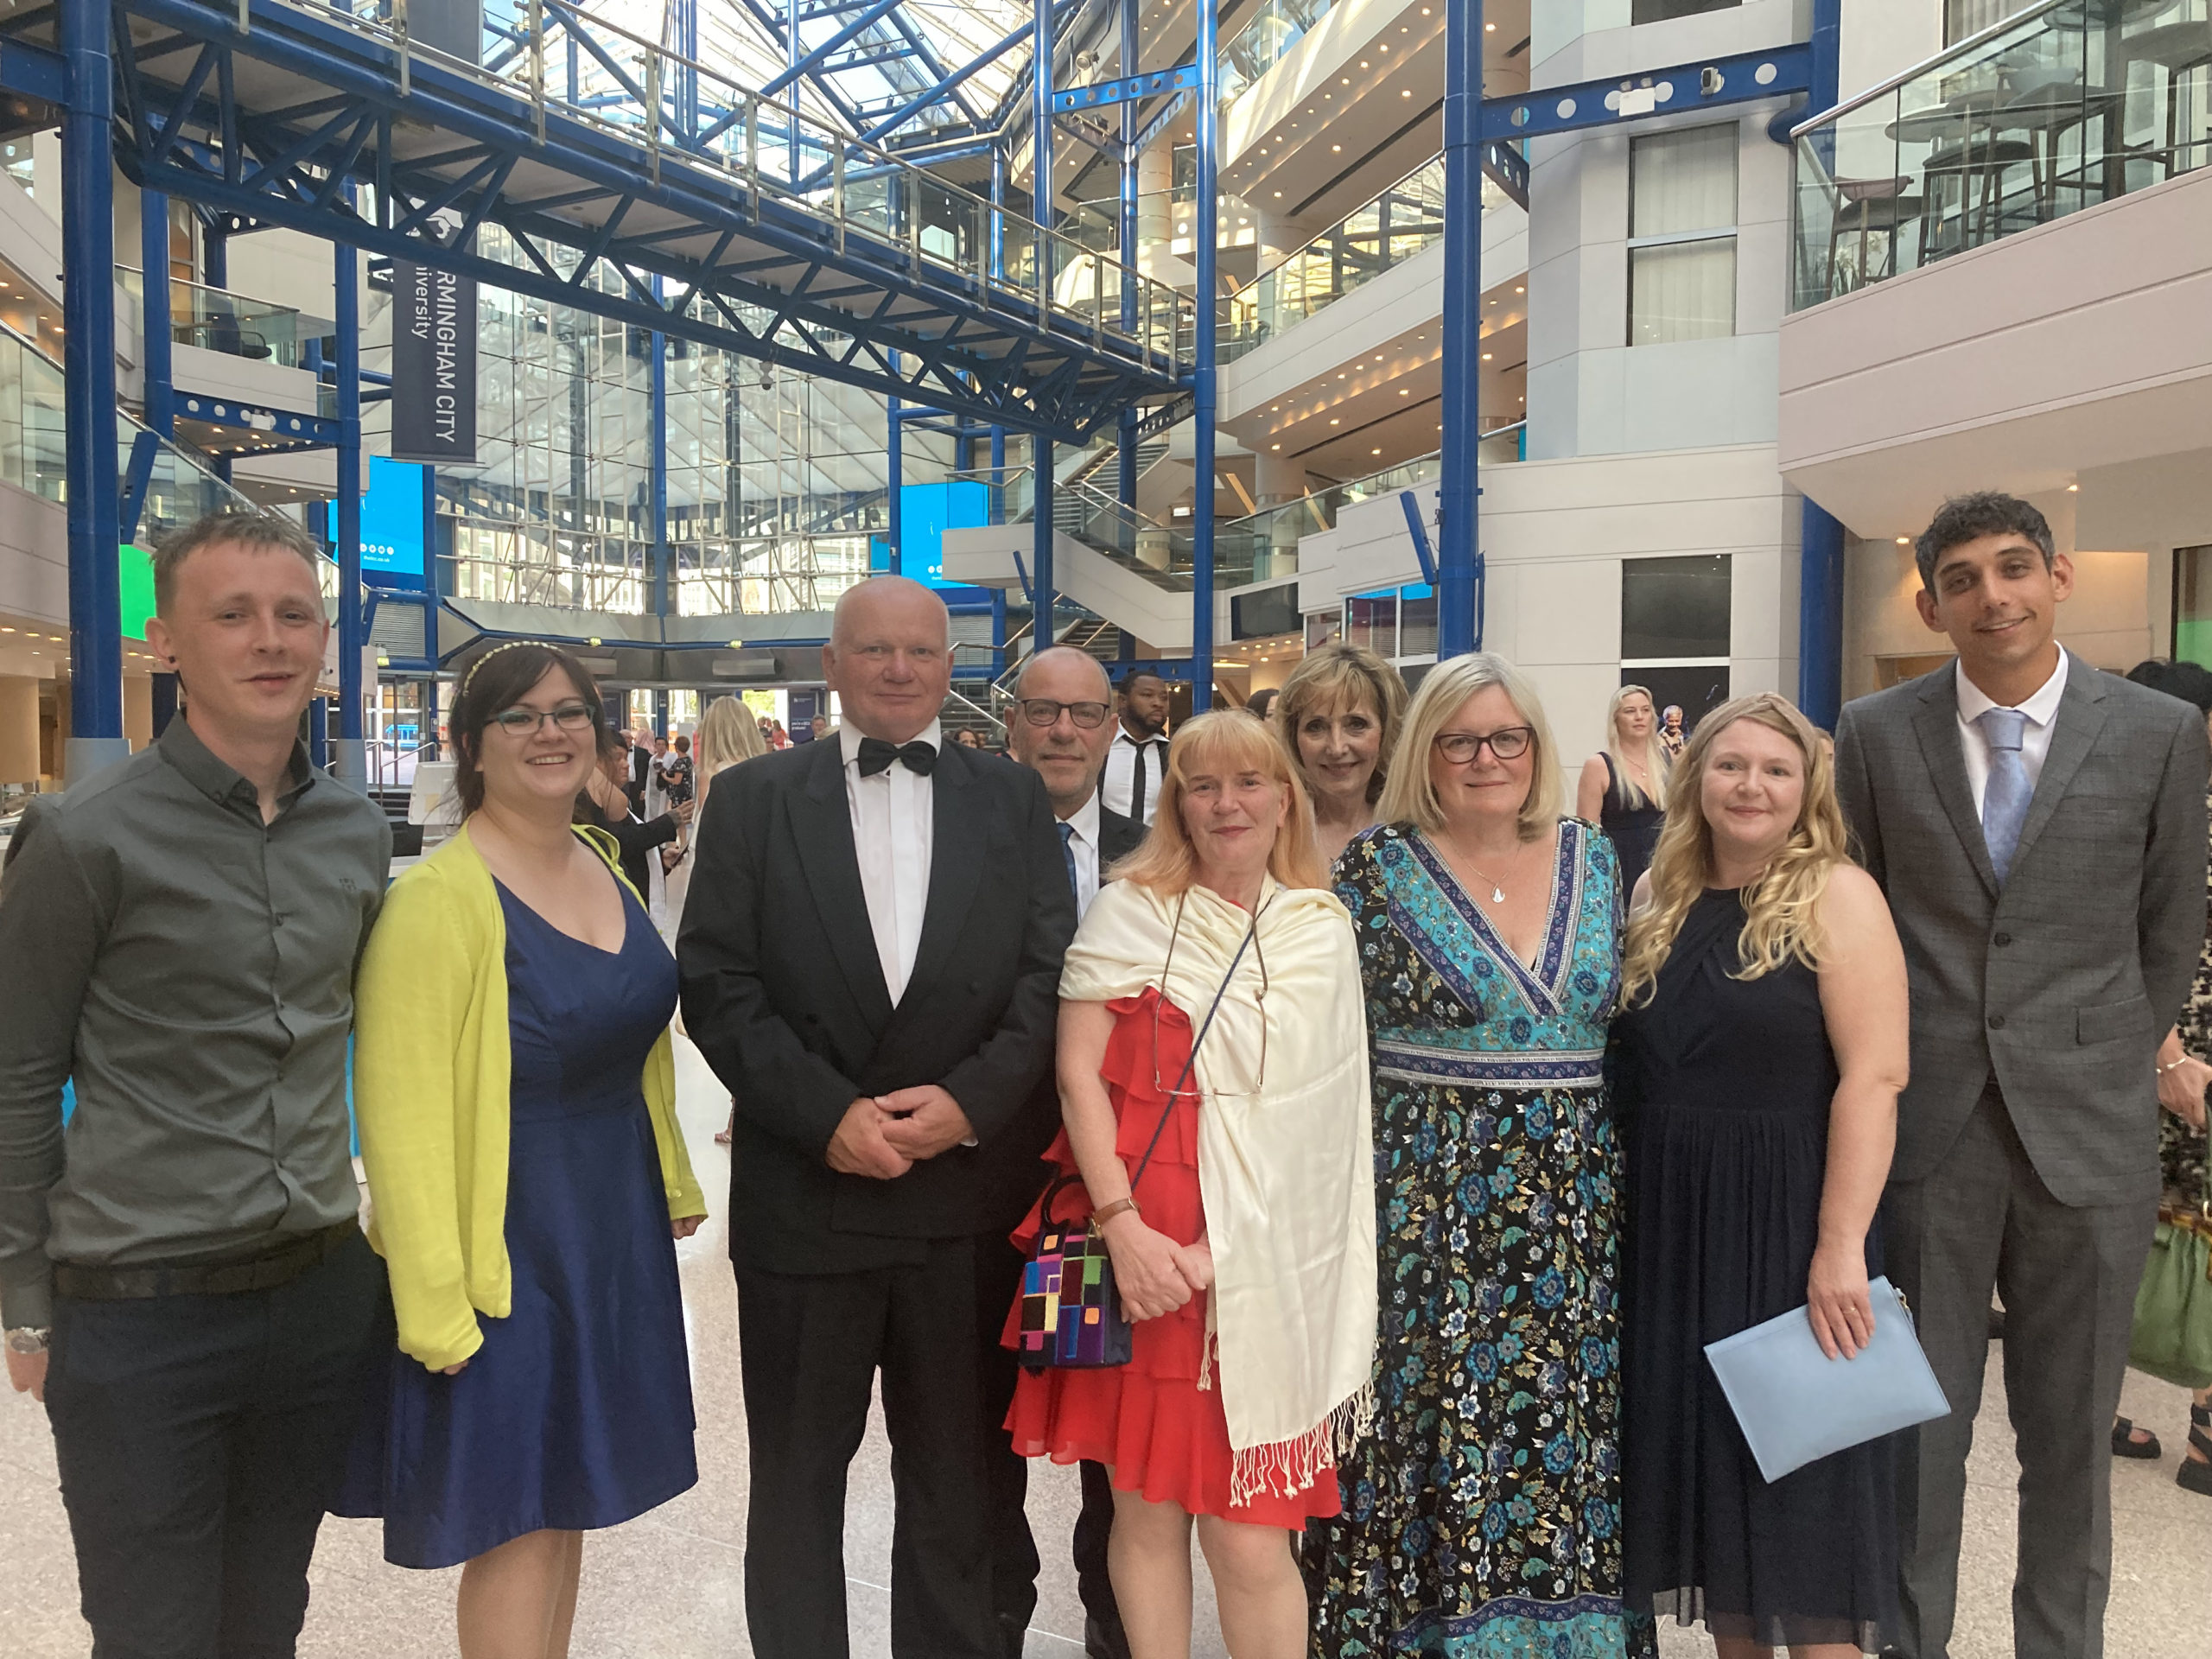 Surrey Choices colleagues at National Learning Disability and Autism Awards